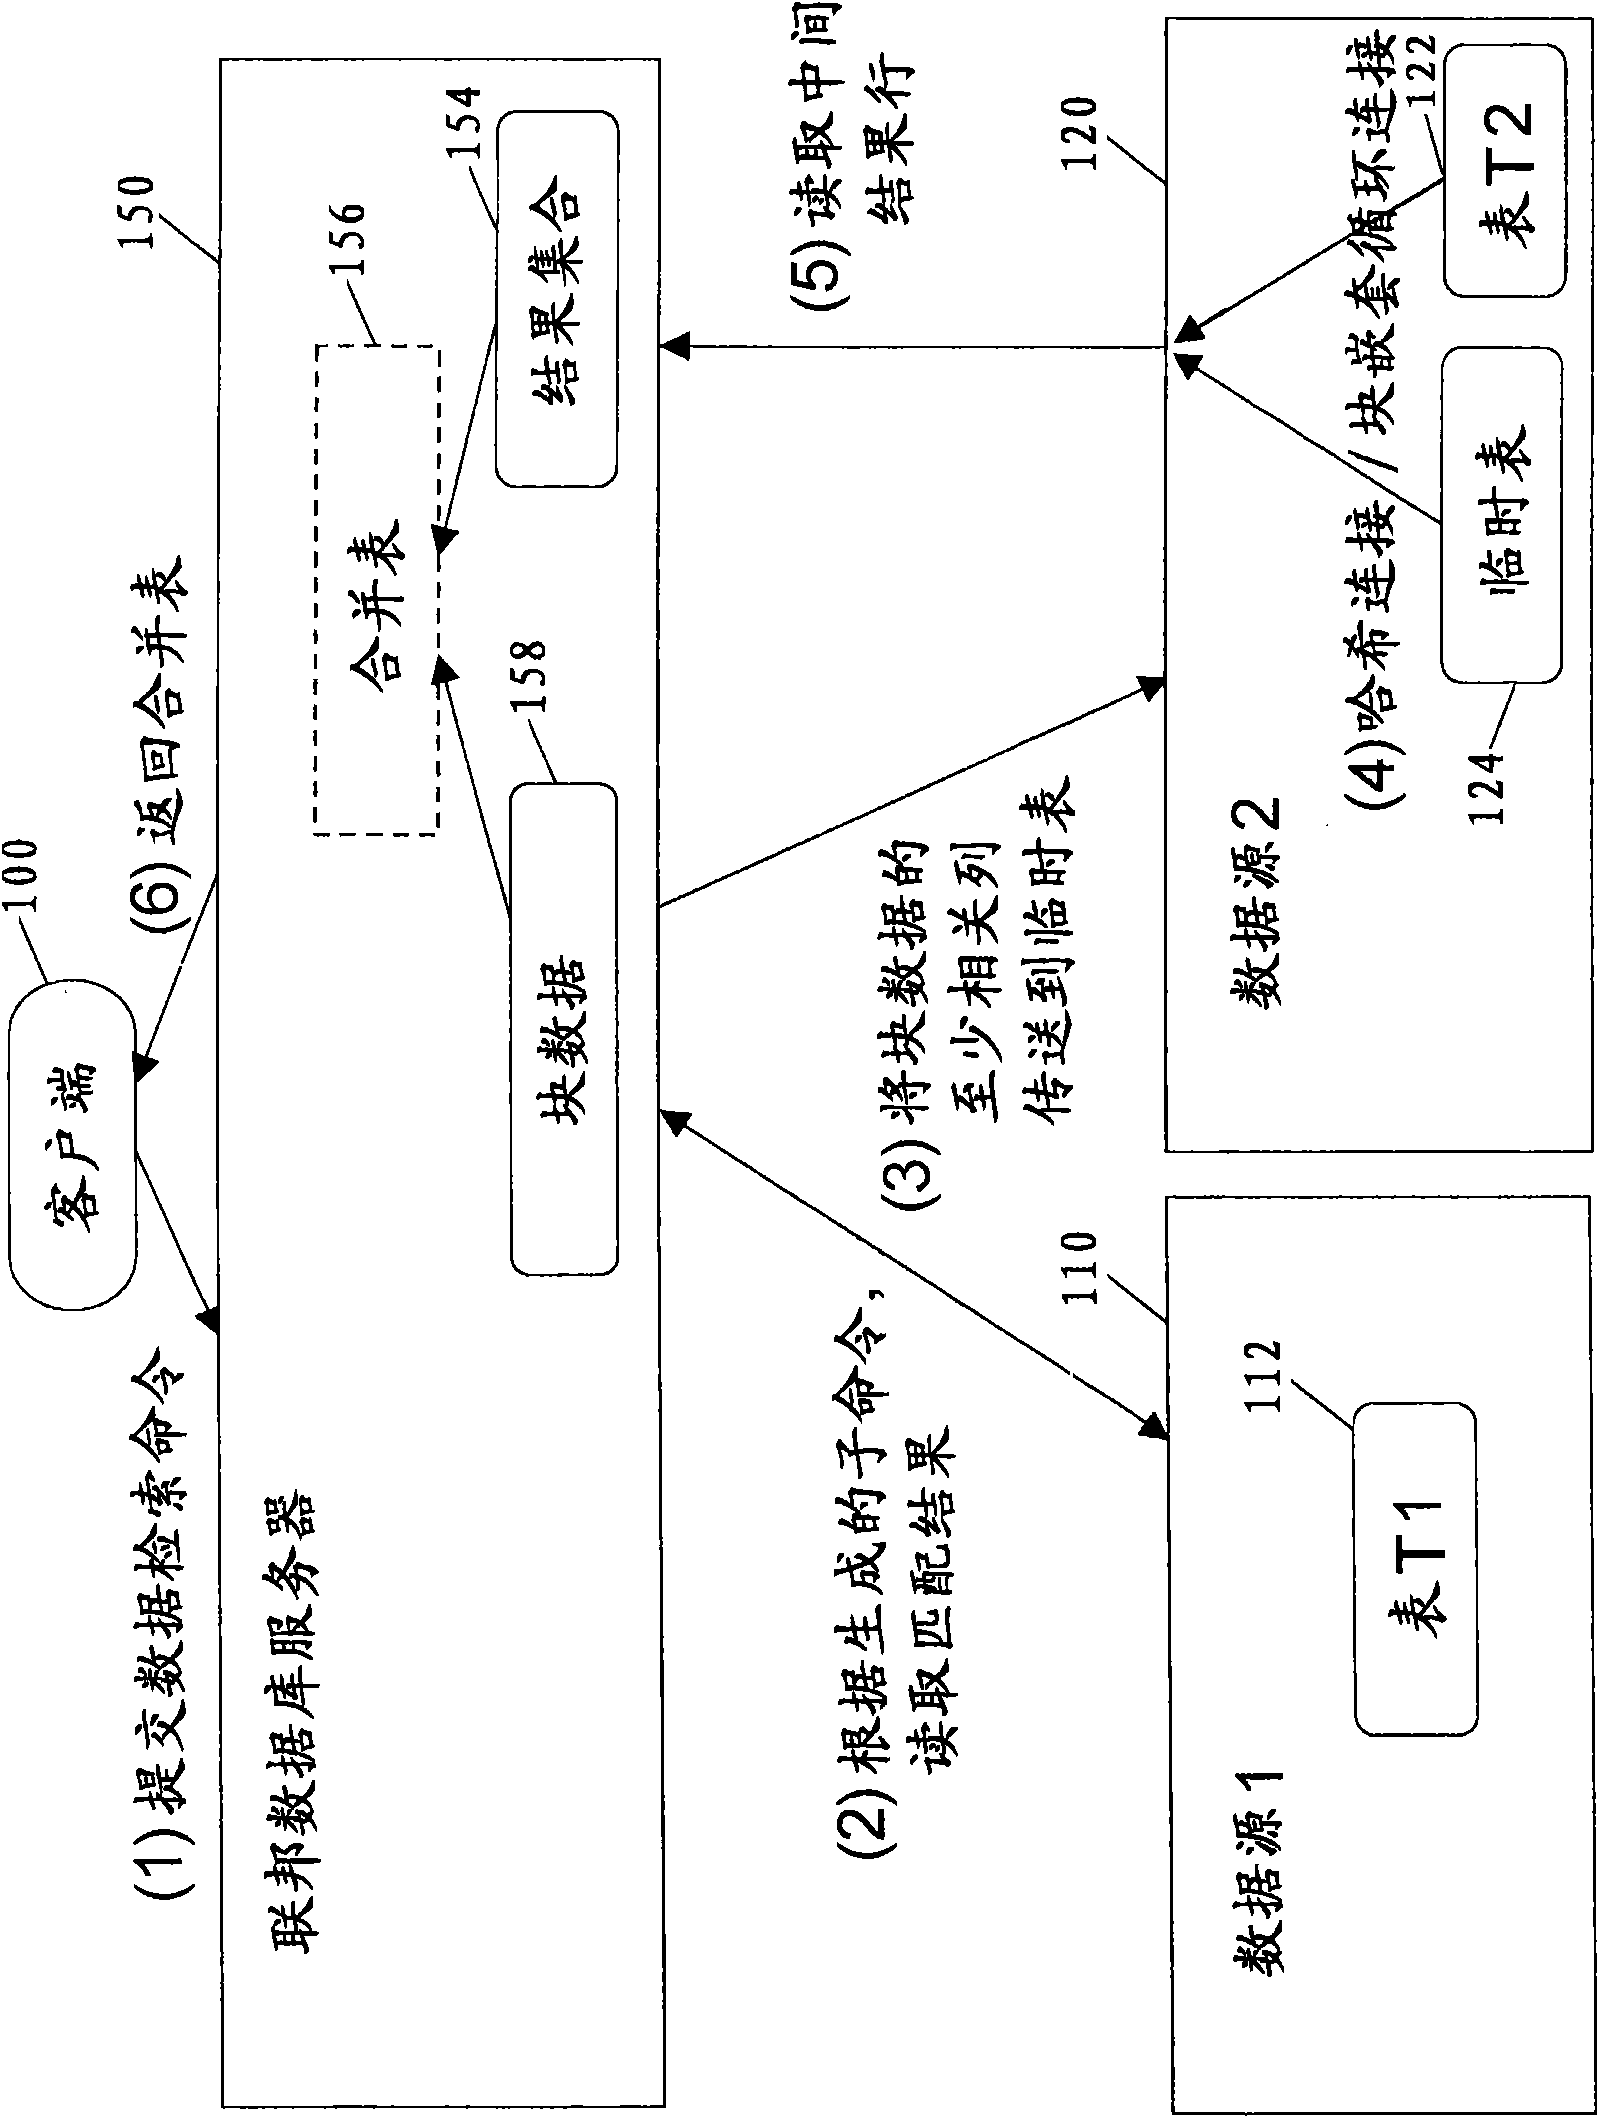 Method and system for connecting tables in a plurality of heterogeneous distributed databases